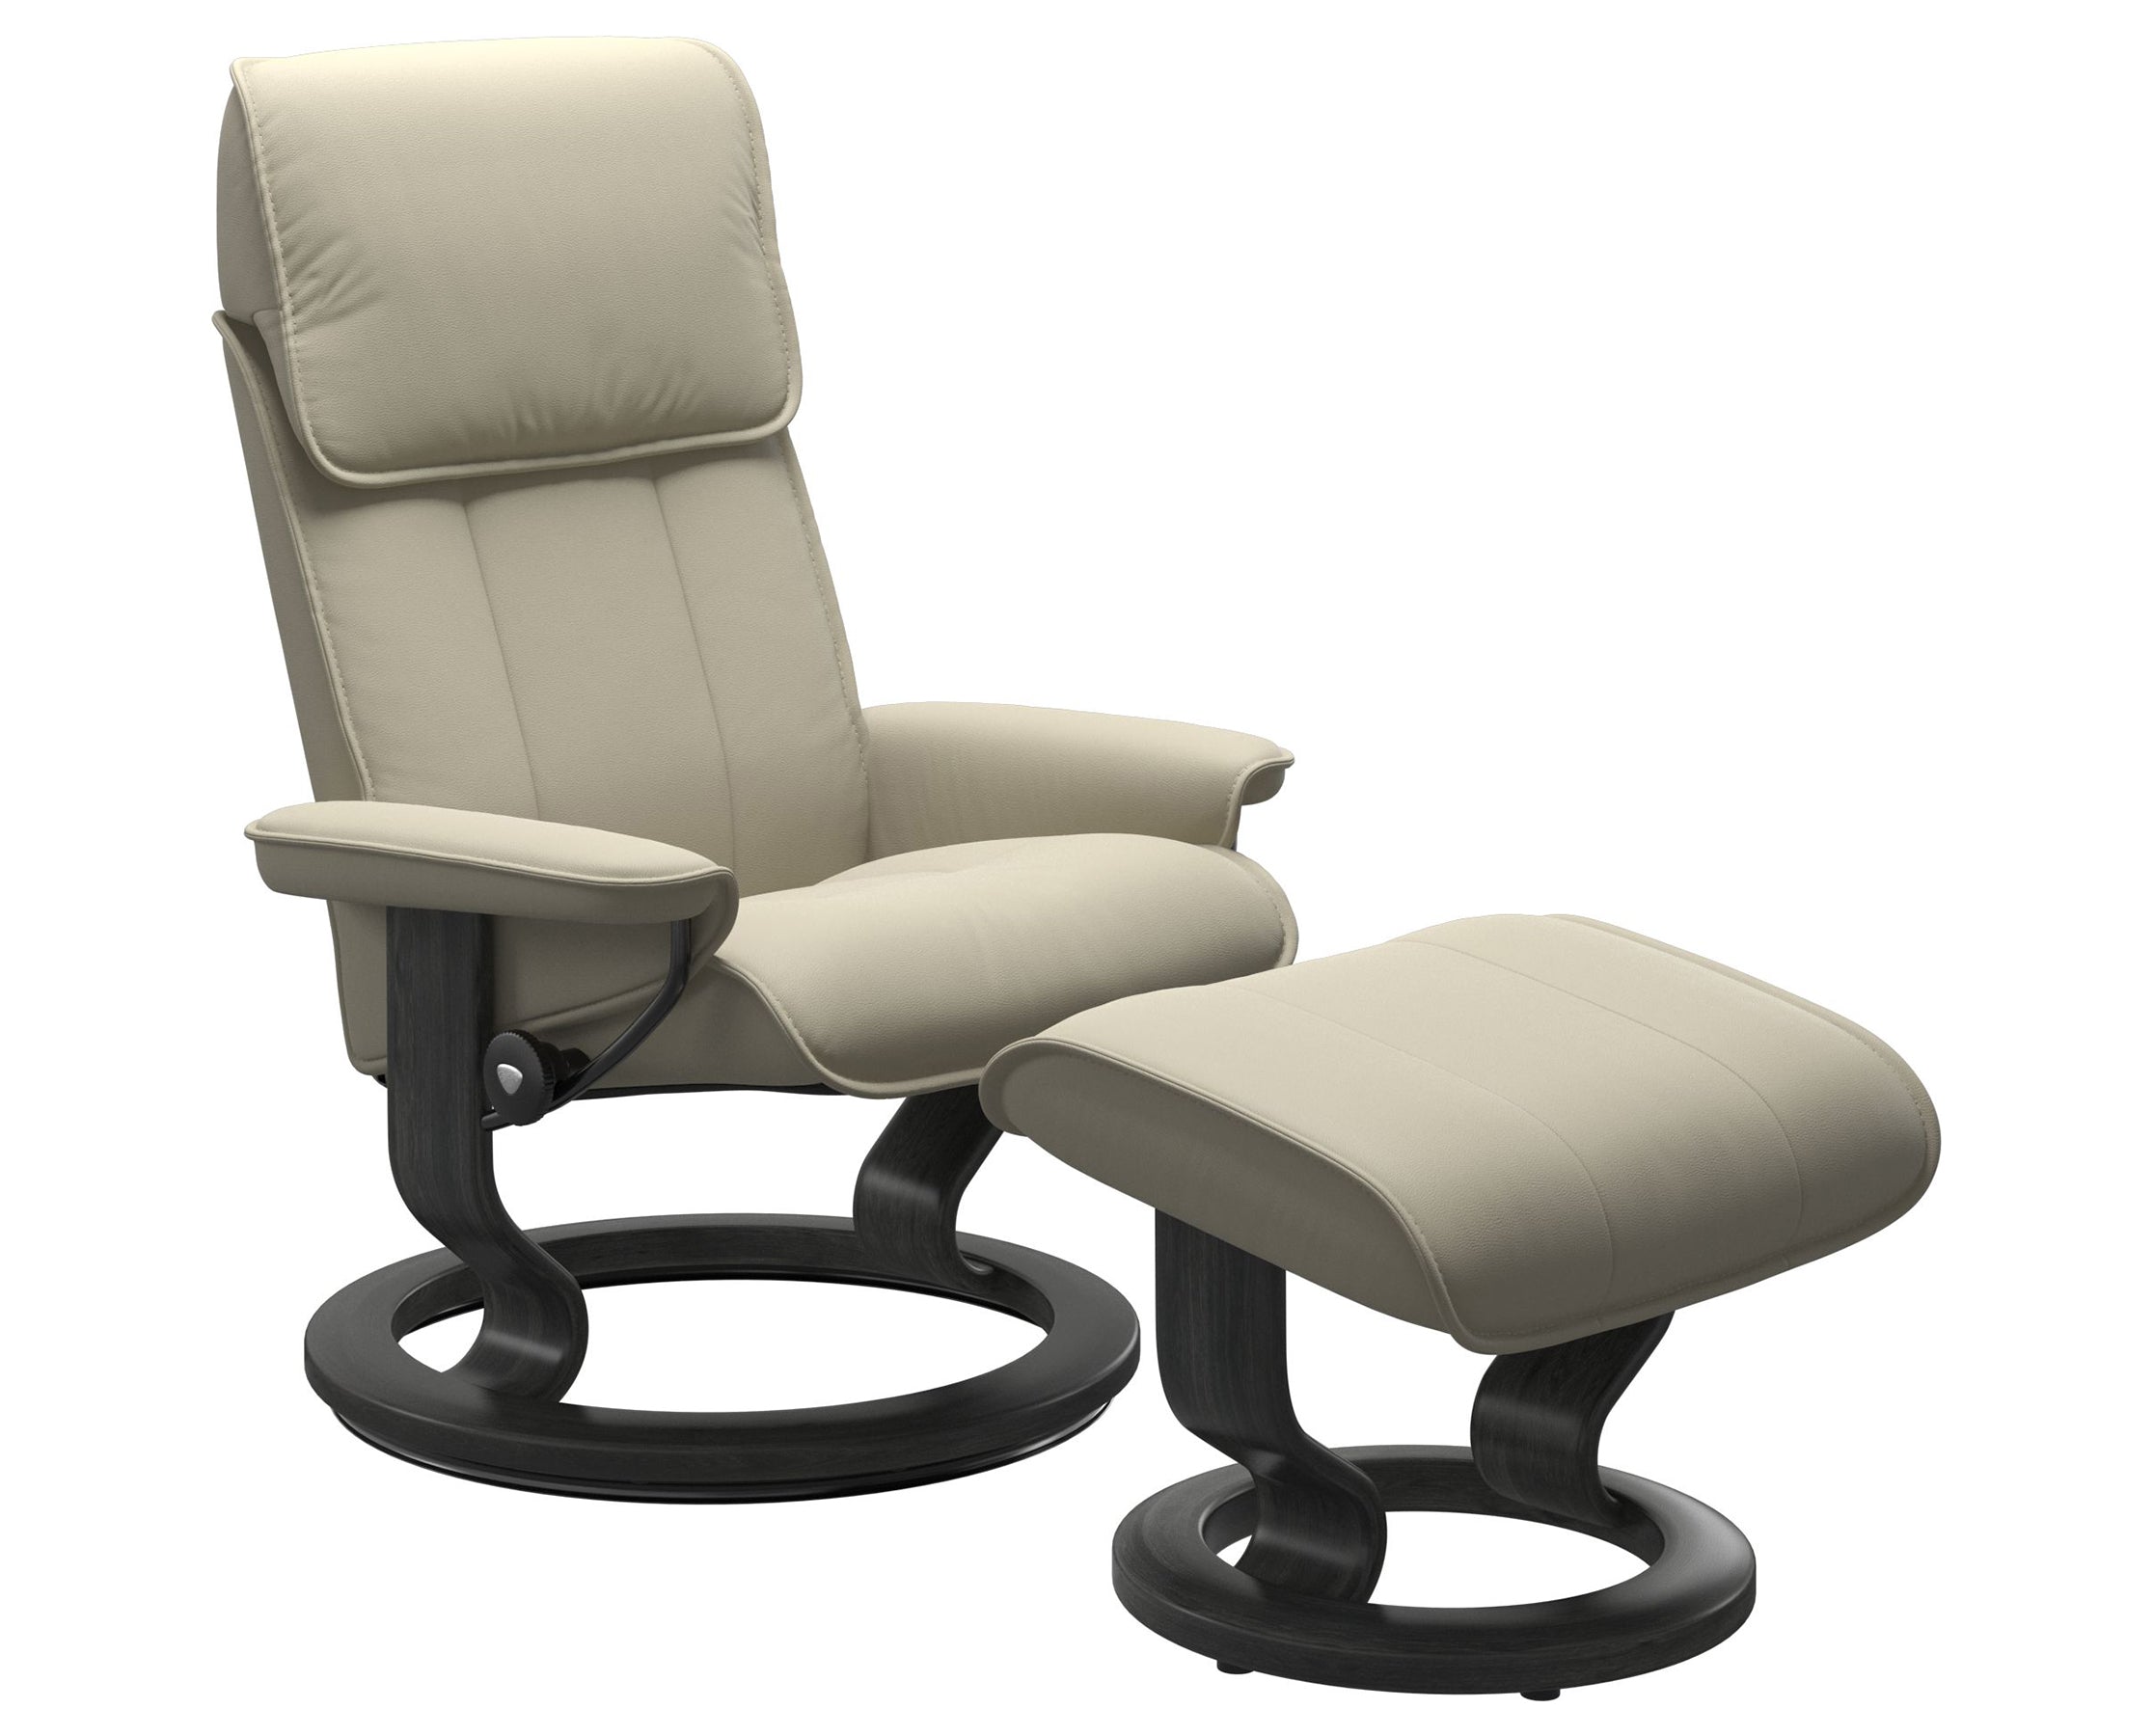 Paloma Leather Light Grey M/L and Grey Base | Stressless Admiral Classic Recliner | Valley Ridge Furniture